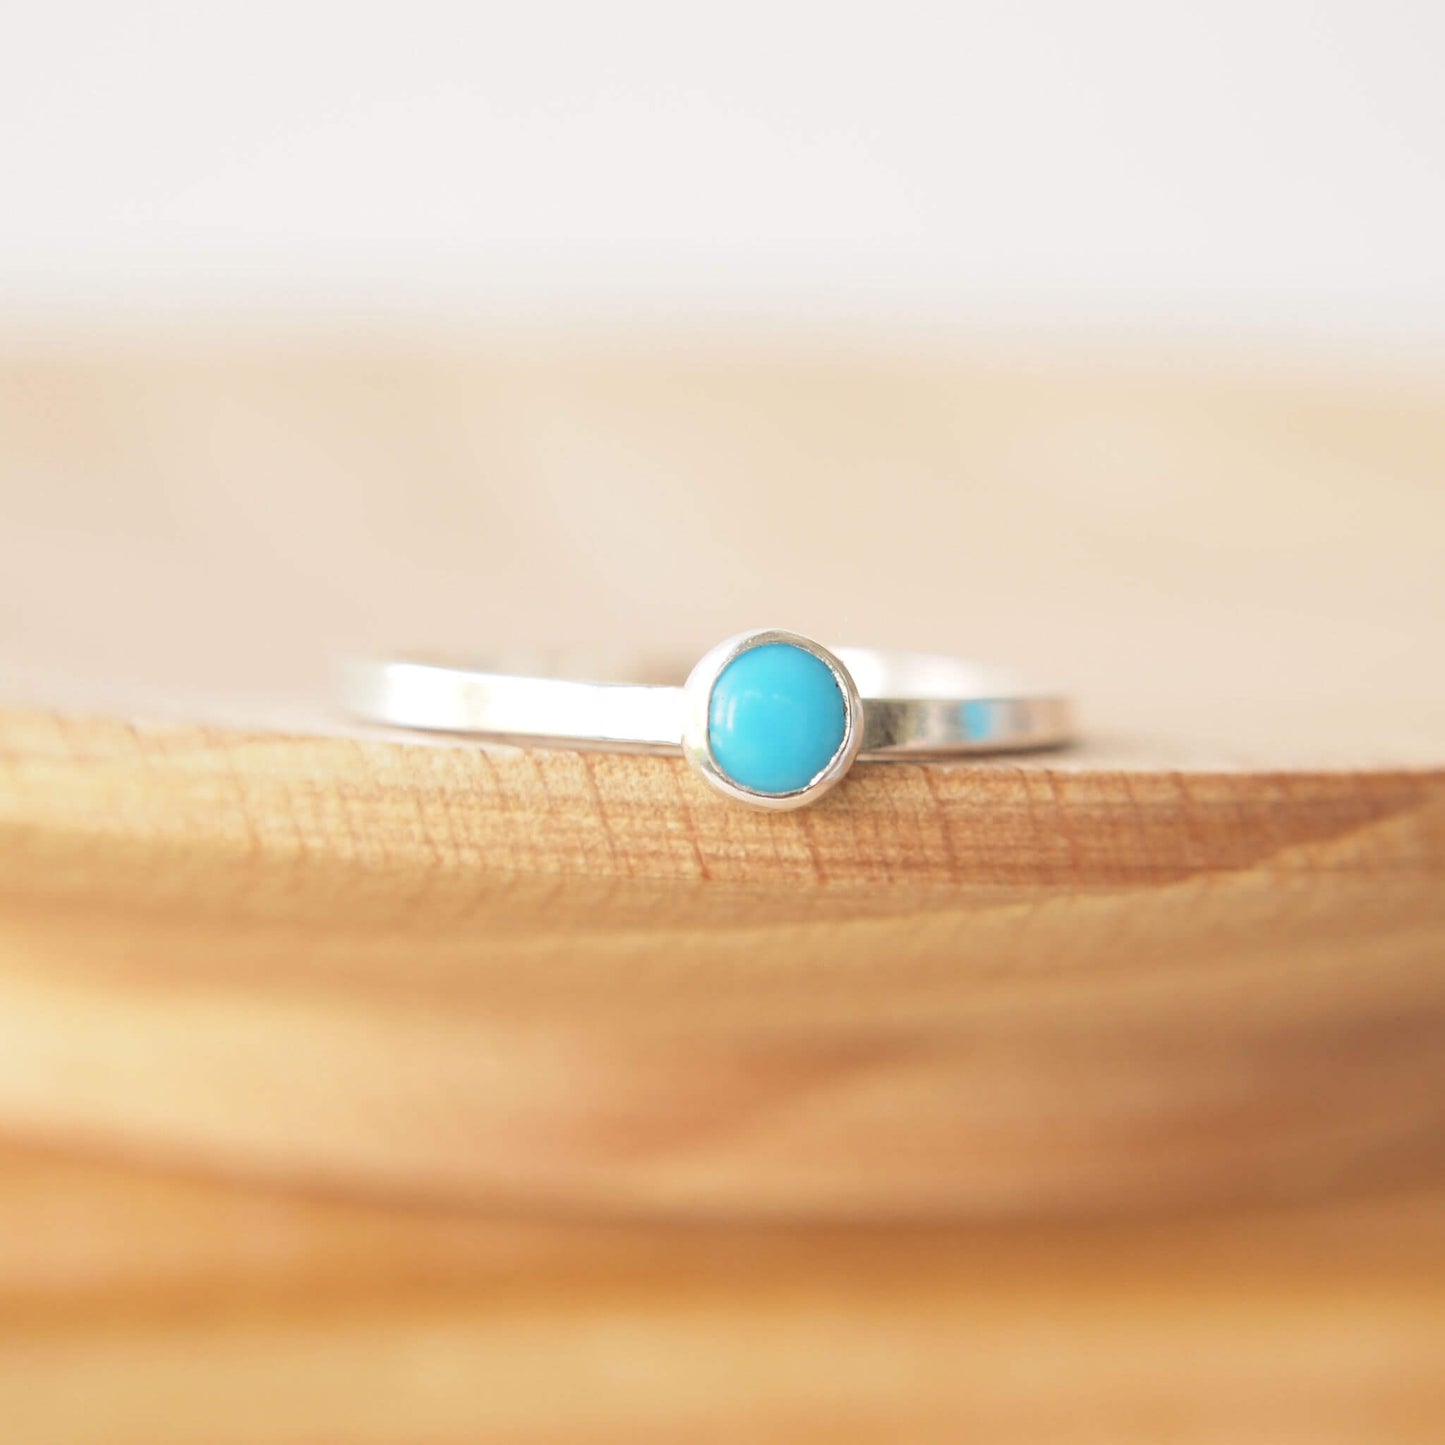 Turquoise Sterling Silver Gemstone ring with a round 4mm cabochon in Turquoise, Birthstone for December. The band is square profile, making it a modern solitaire ring. Handmade in Scotland by maram jewellery